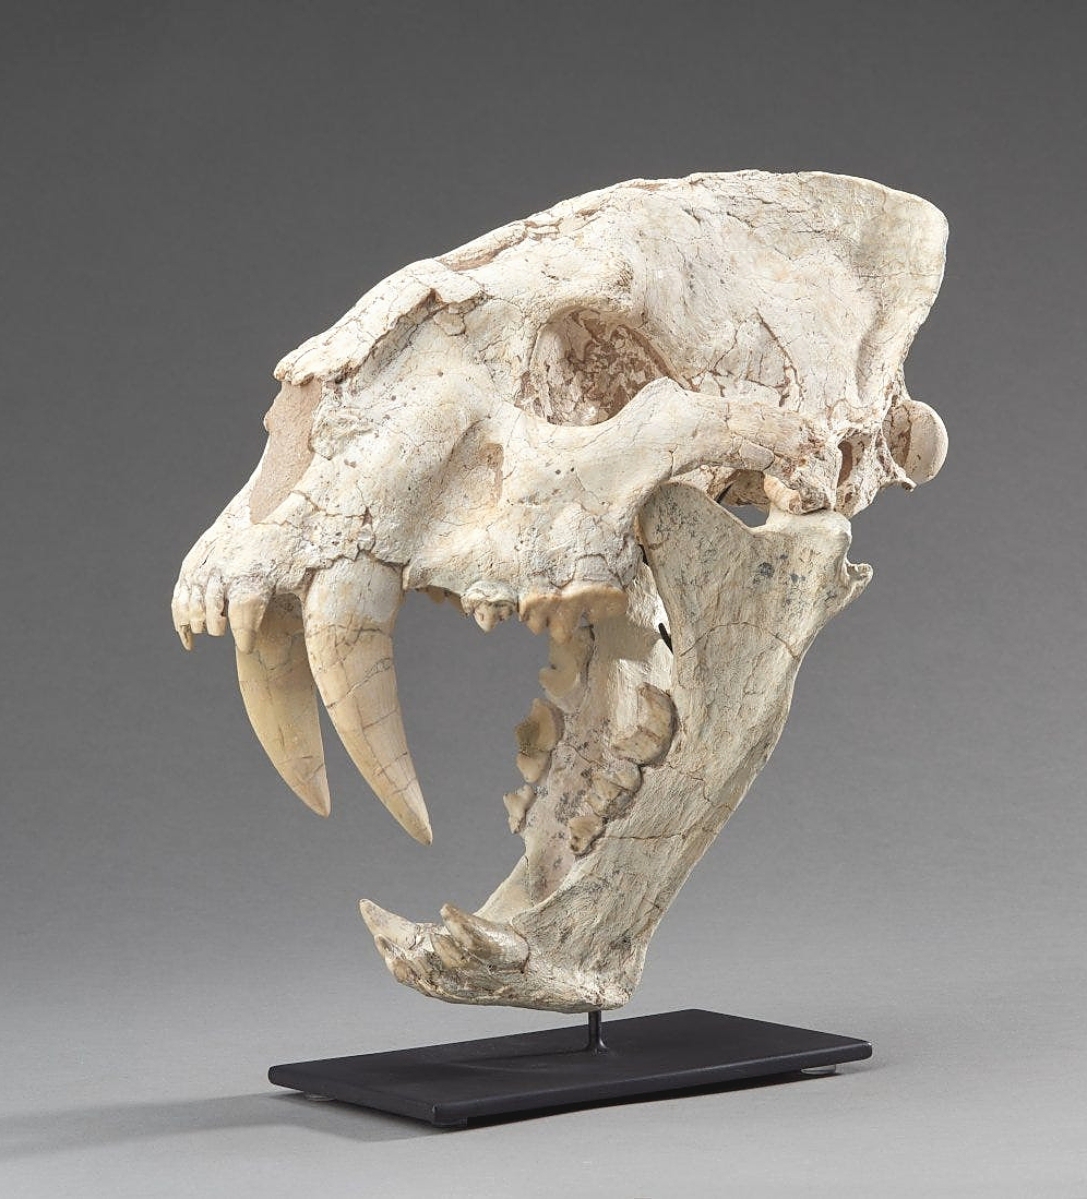 With less than two percent restoration, the firm wrote that this fossil sabercat skull from a Machairodus was a very high-quality specimen. The sabers alone were 4 inches long and it sold for $37,500.